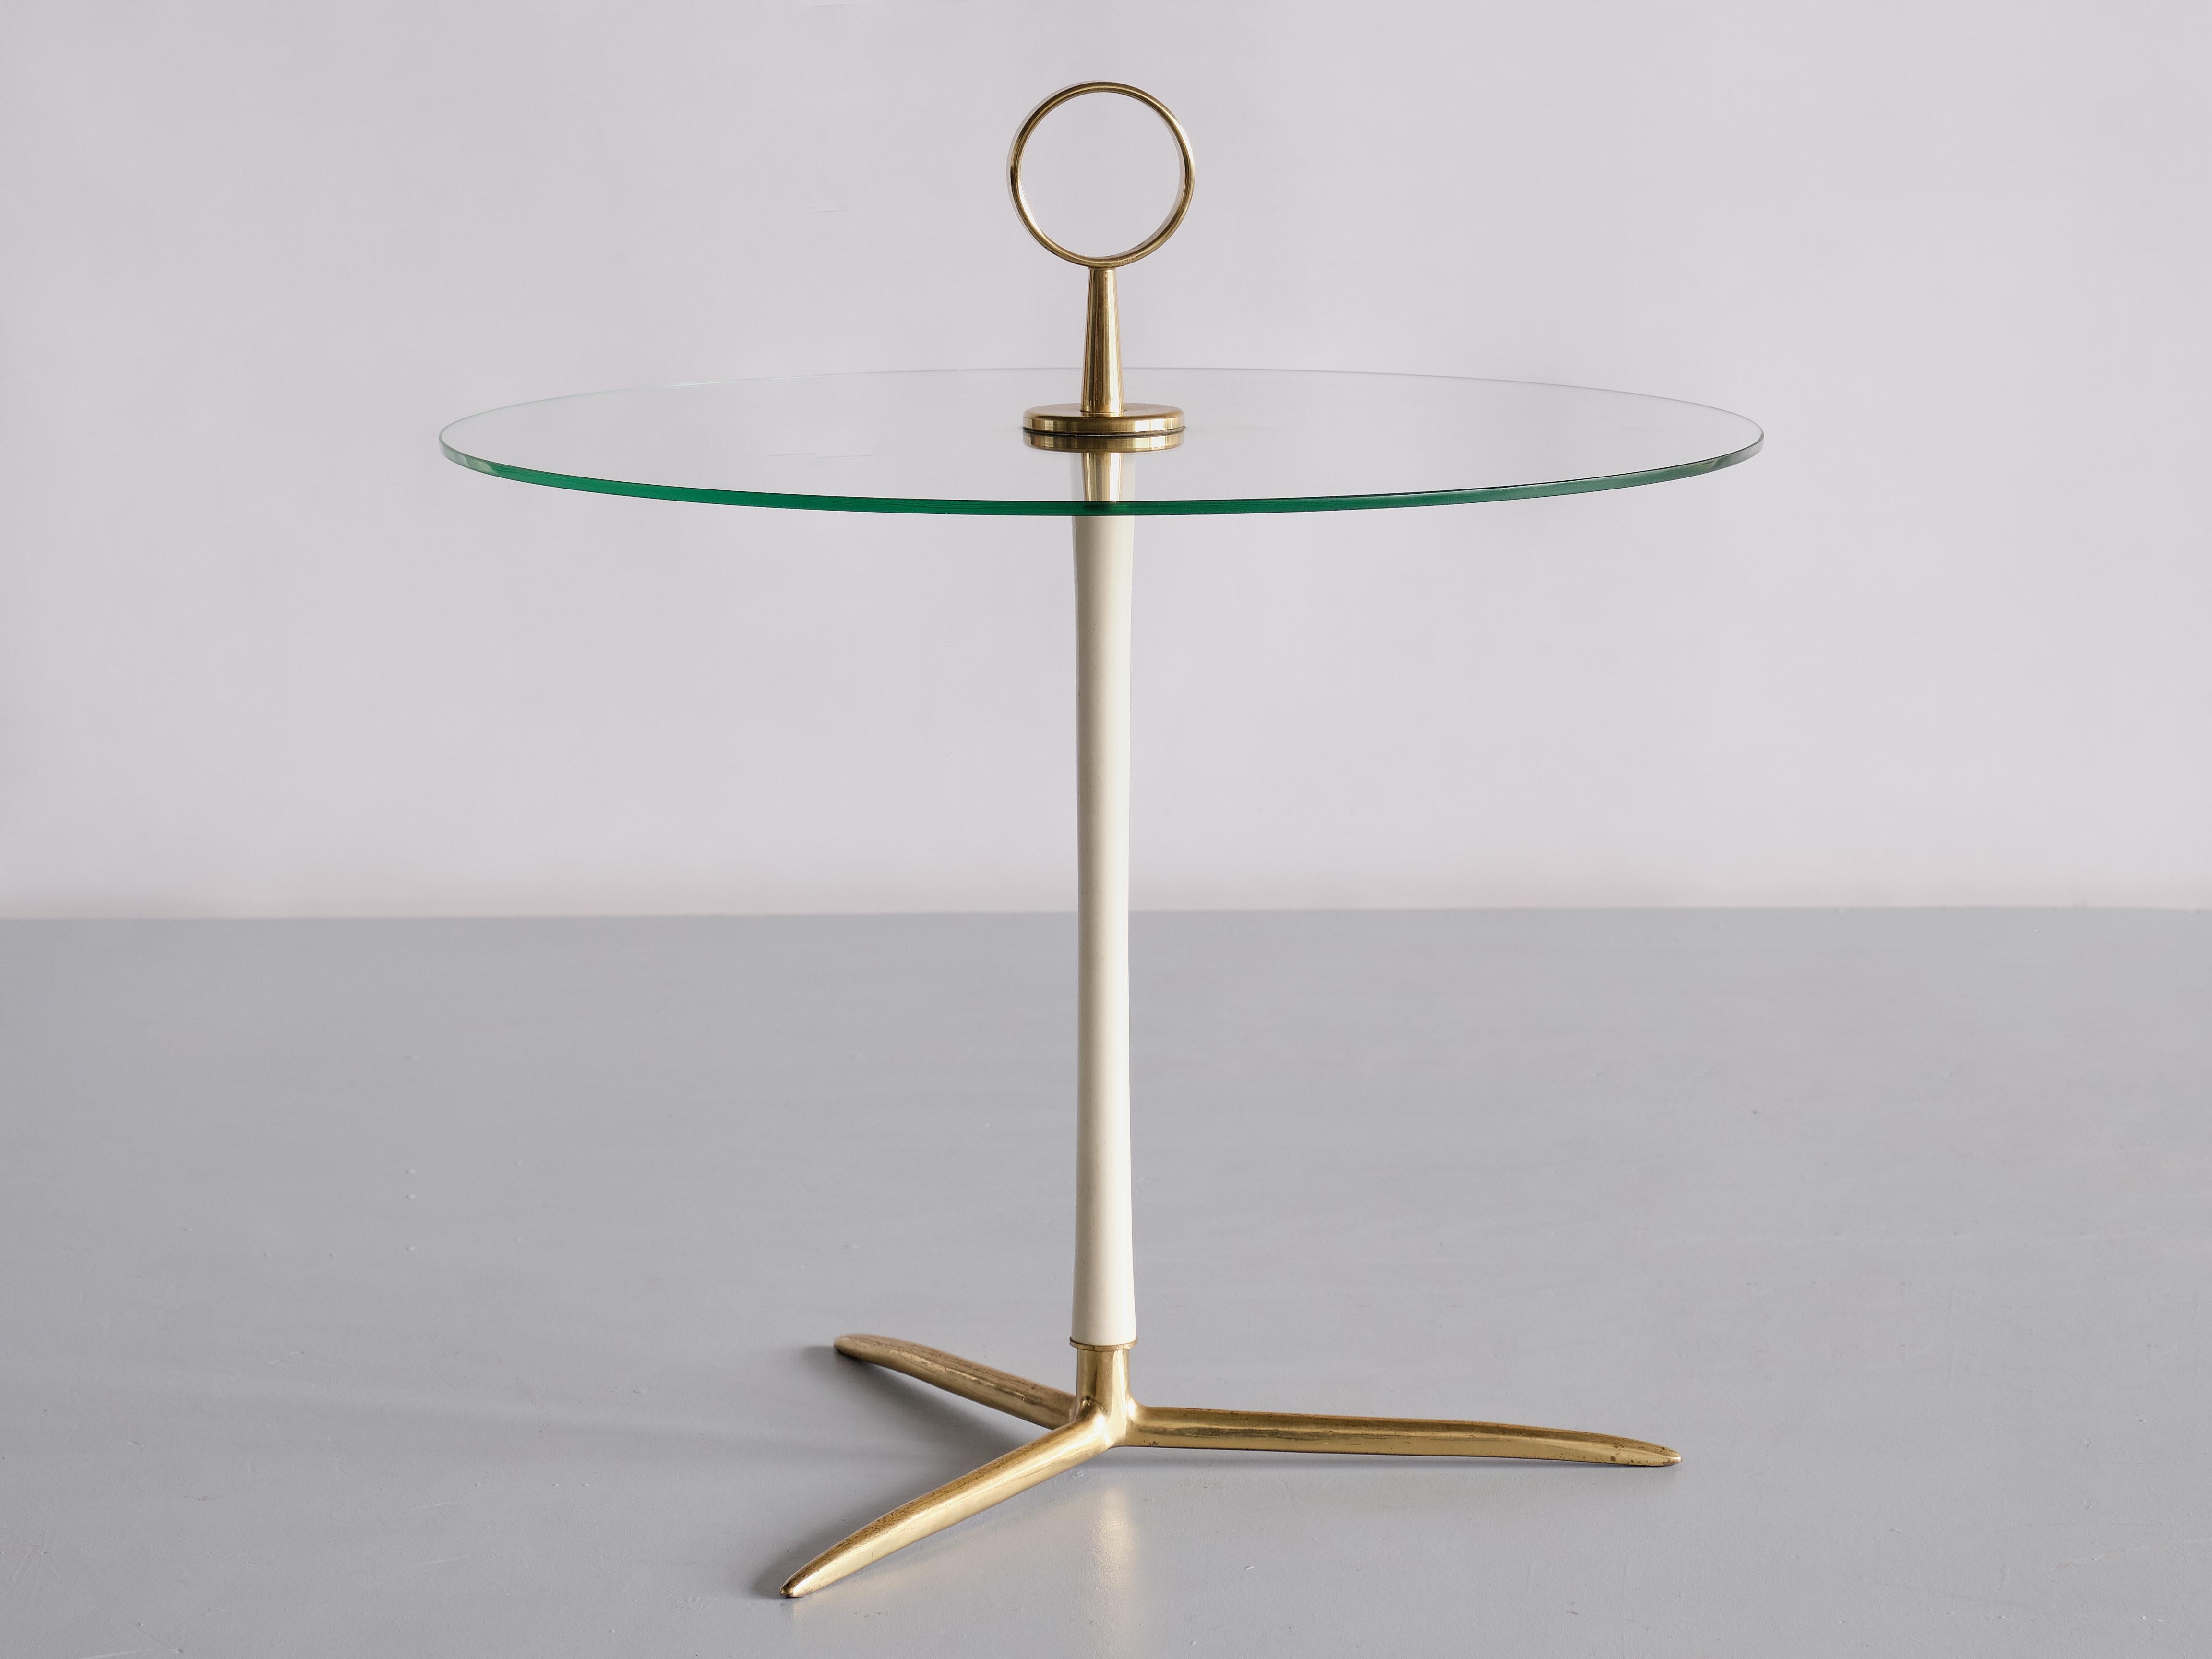 This elegant side table was designed by Cesare Lacca and manufactured in Italy in the mid 1950s. The table consists of a sculptural three legged base in brass and central stem in cream white lacquered metal. The round top in hardened, glass with a